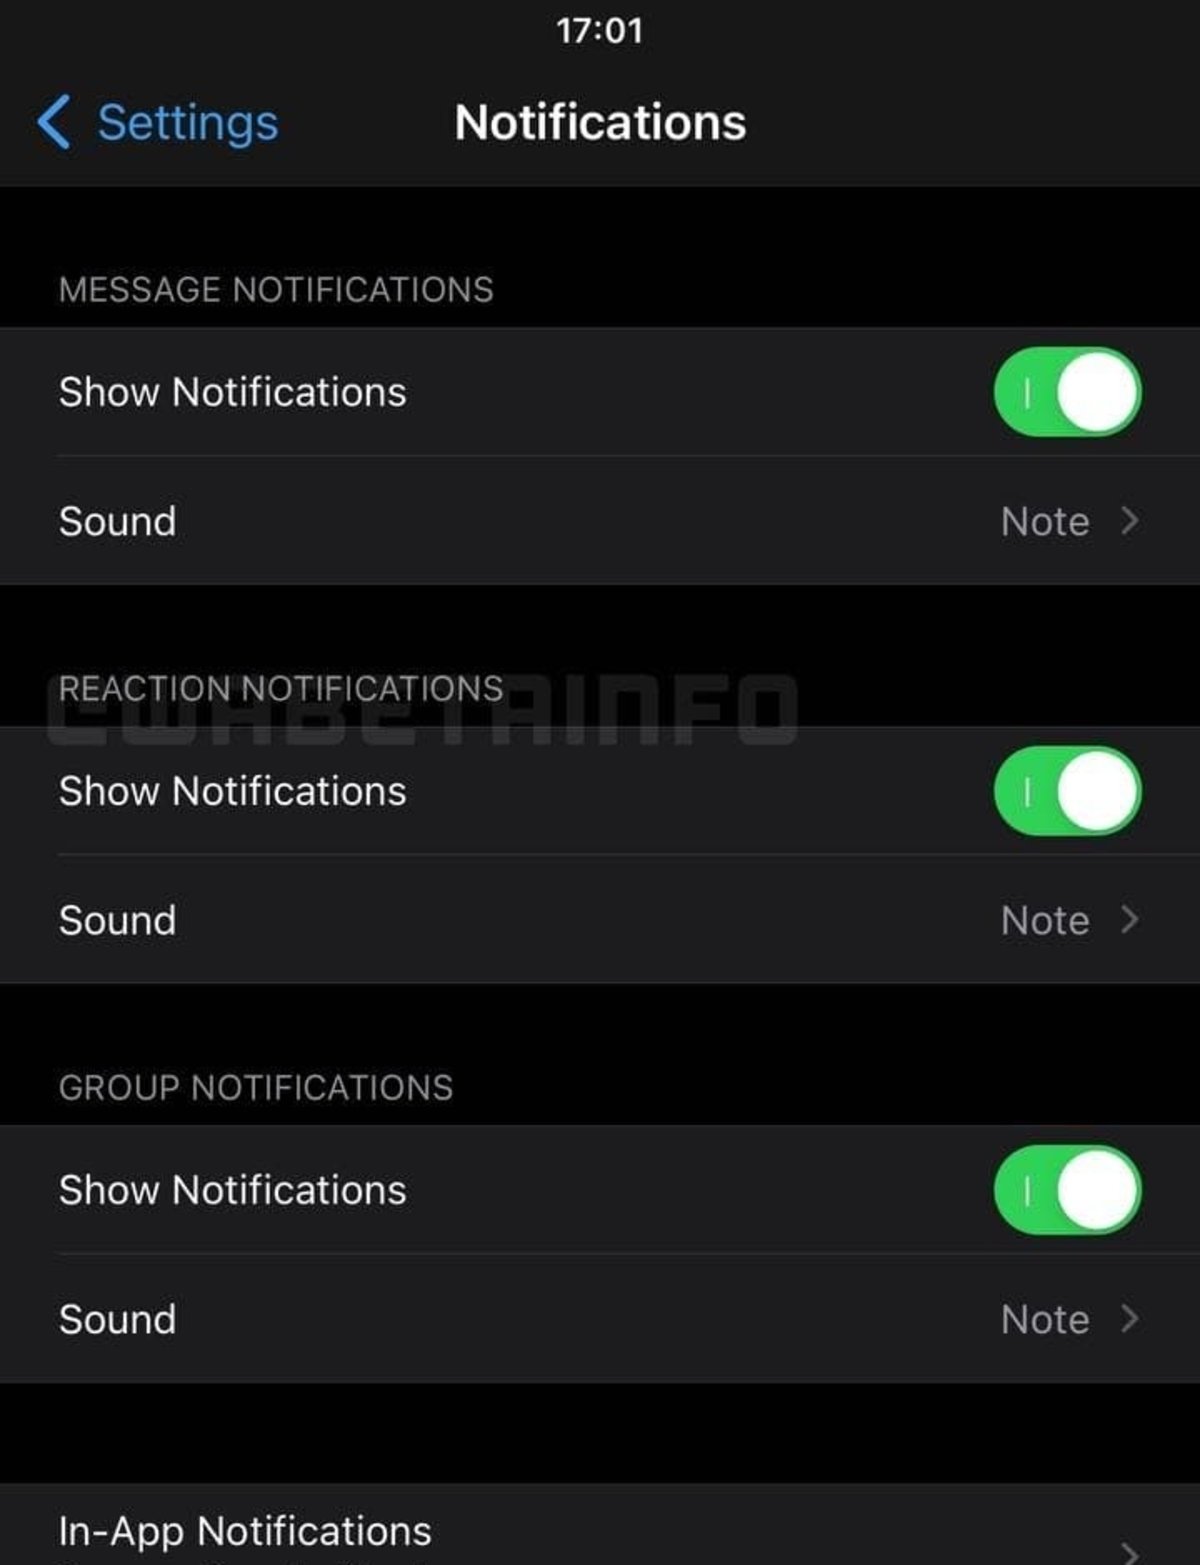 WhatsApp reactions will also show notifications